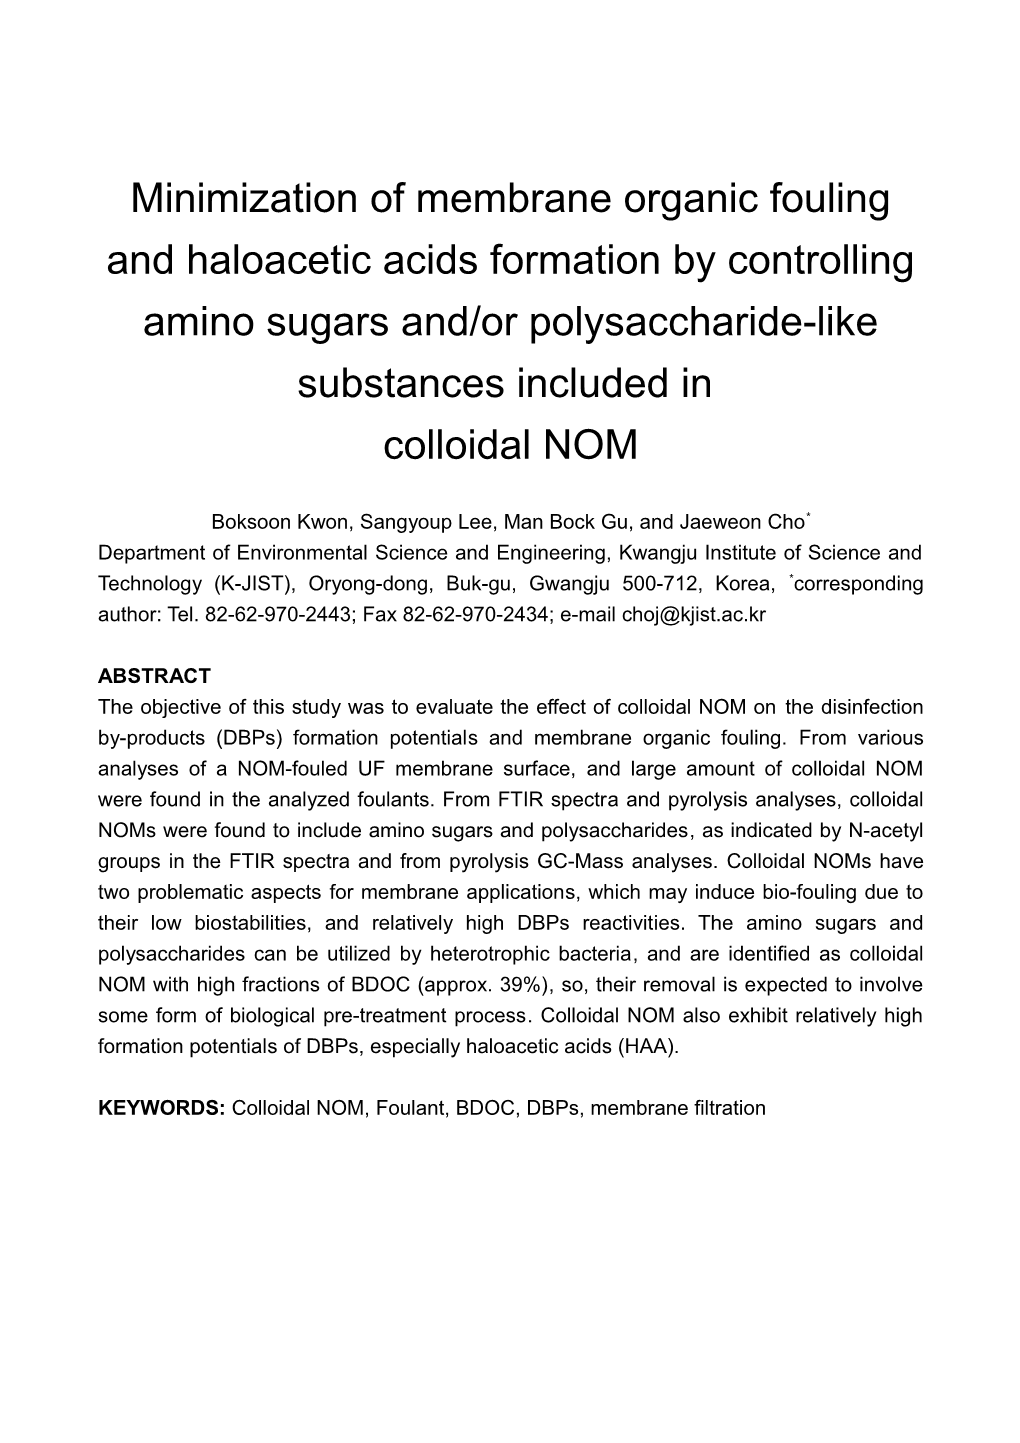 Minimization of Membrane Organic Fouling and Haloacetic Acids Formation by Controlling